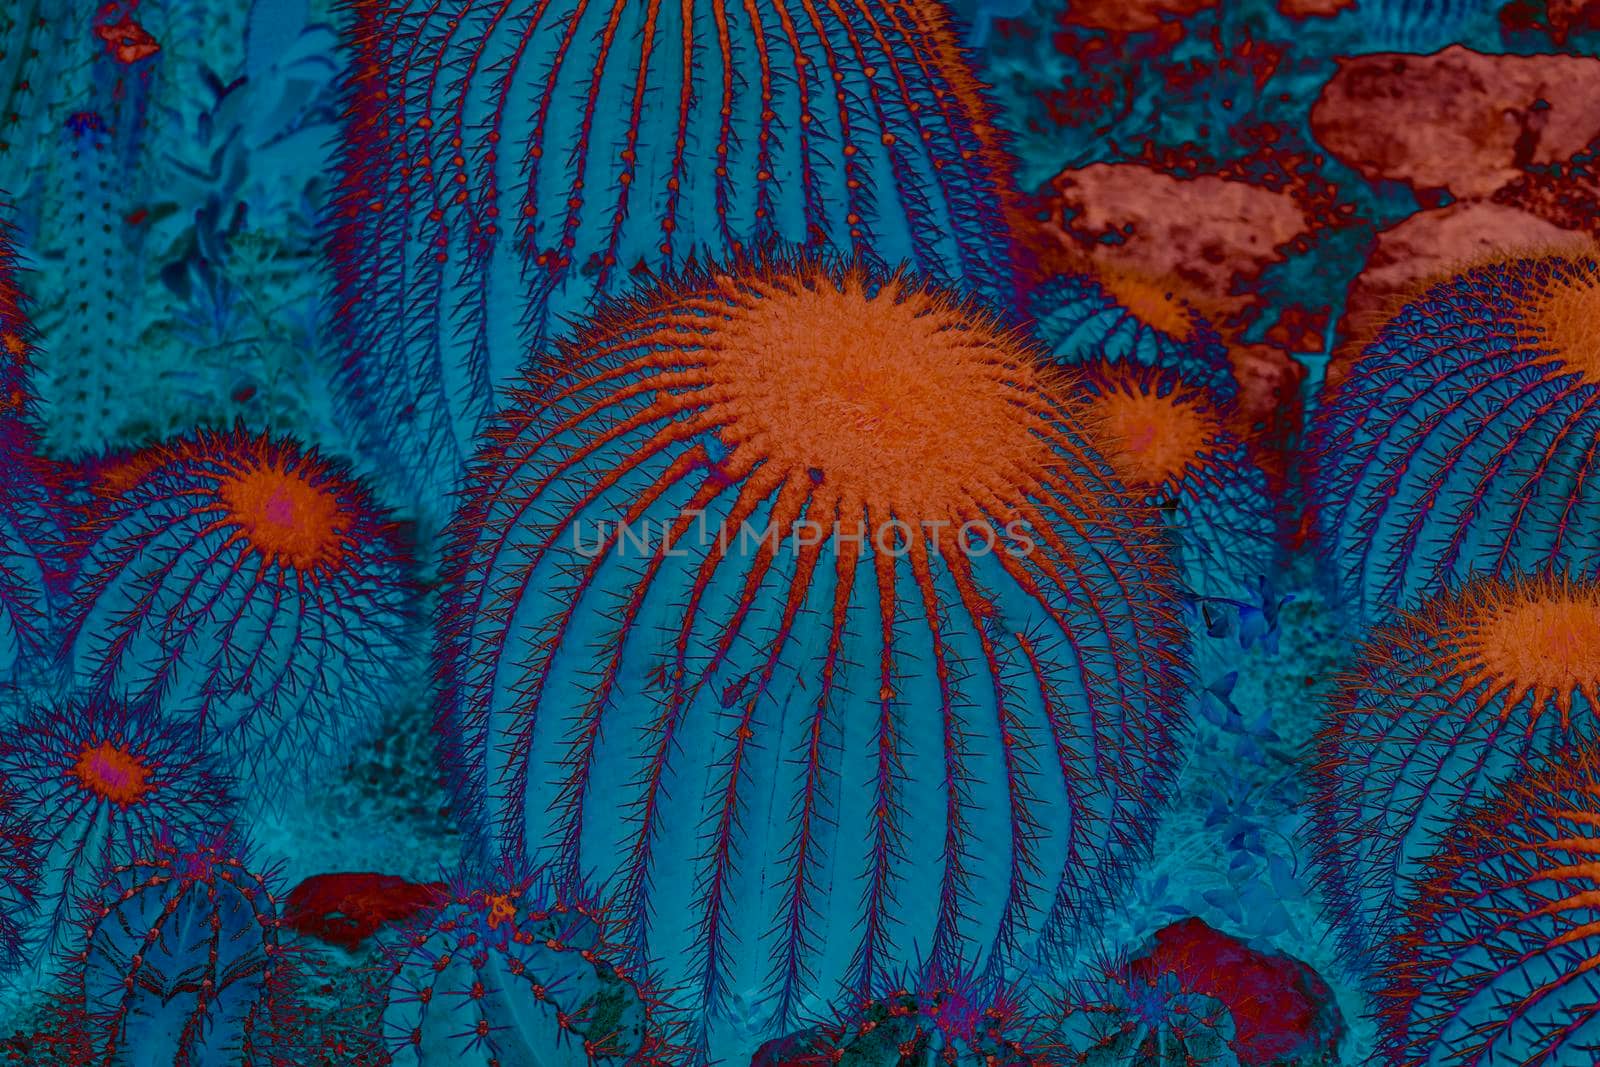 Abstract cactus texture background in blue and red